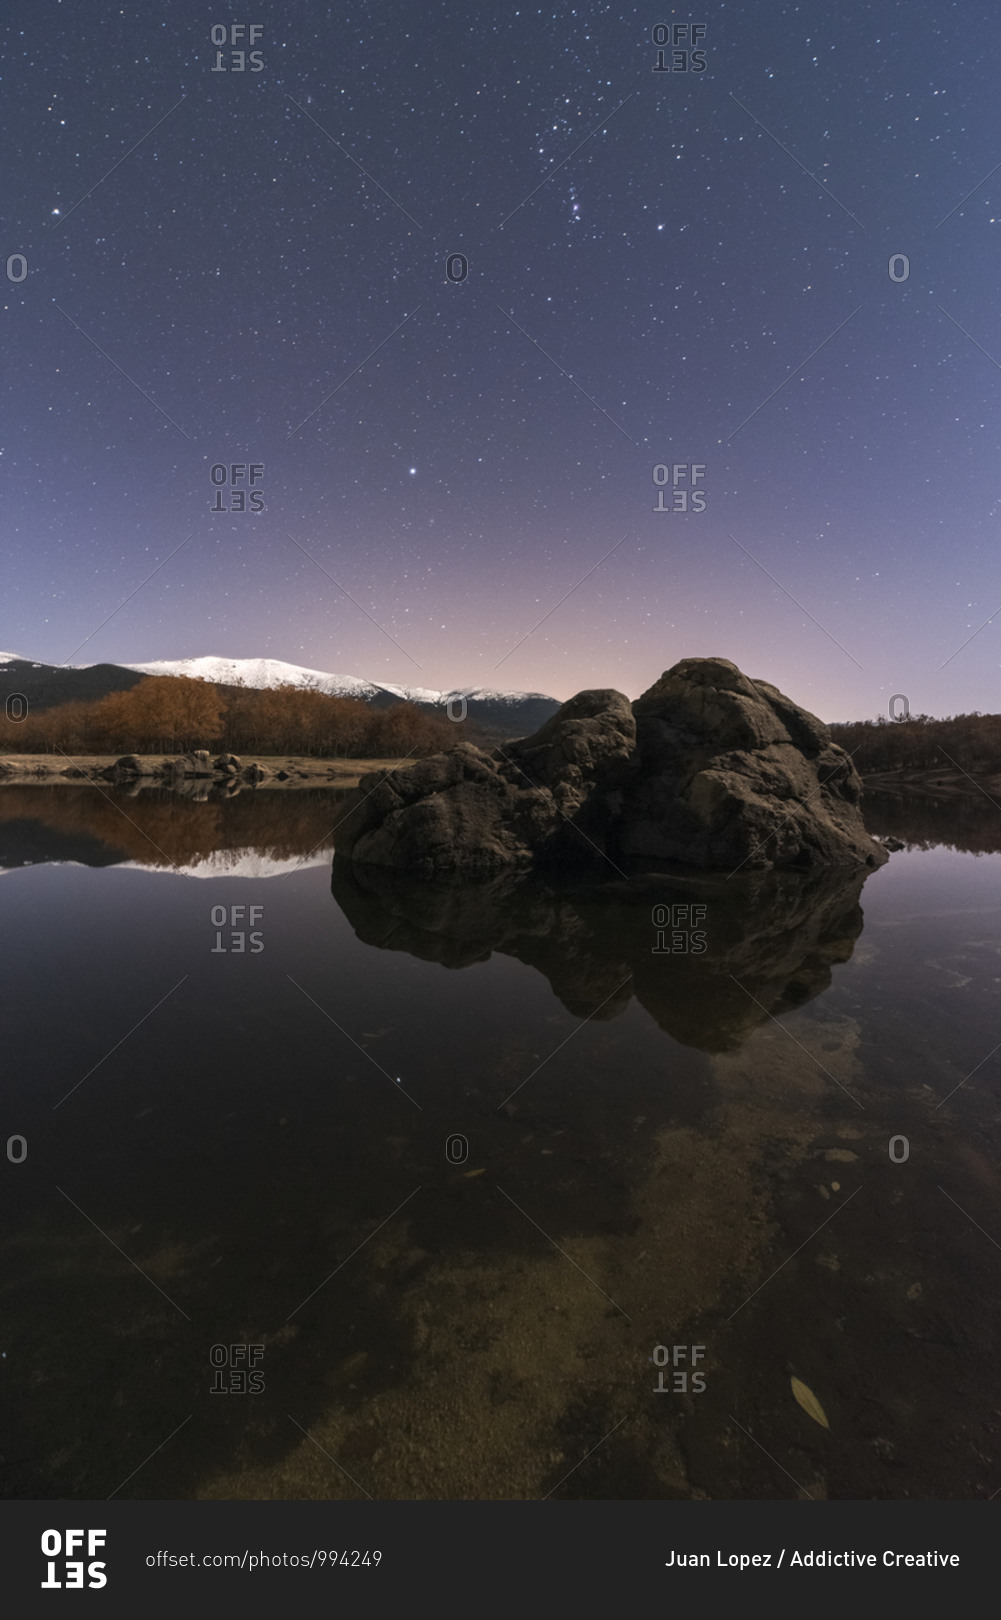 Amazing scenery of lake and snow mountains under dark sky with stars and a rock in first plane